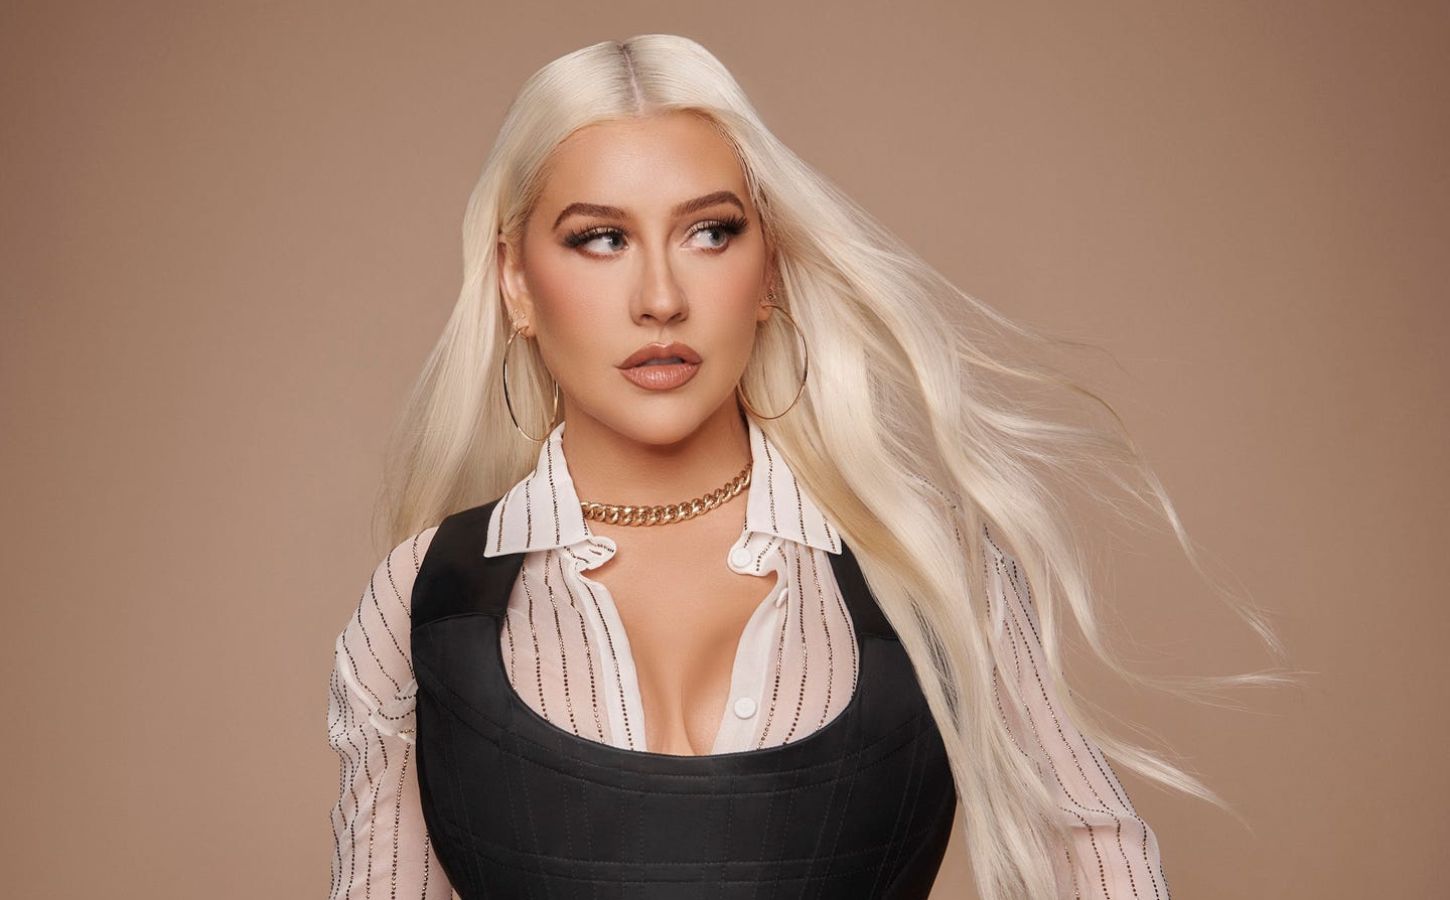 Christina Aguilera standing in front of a neutral background wearing a white shirt and black corset top with long straight blonde hair